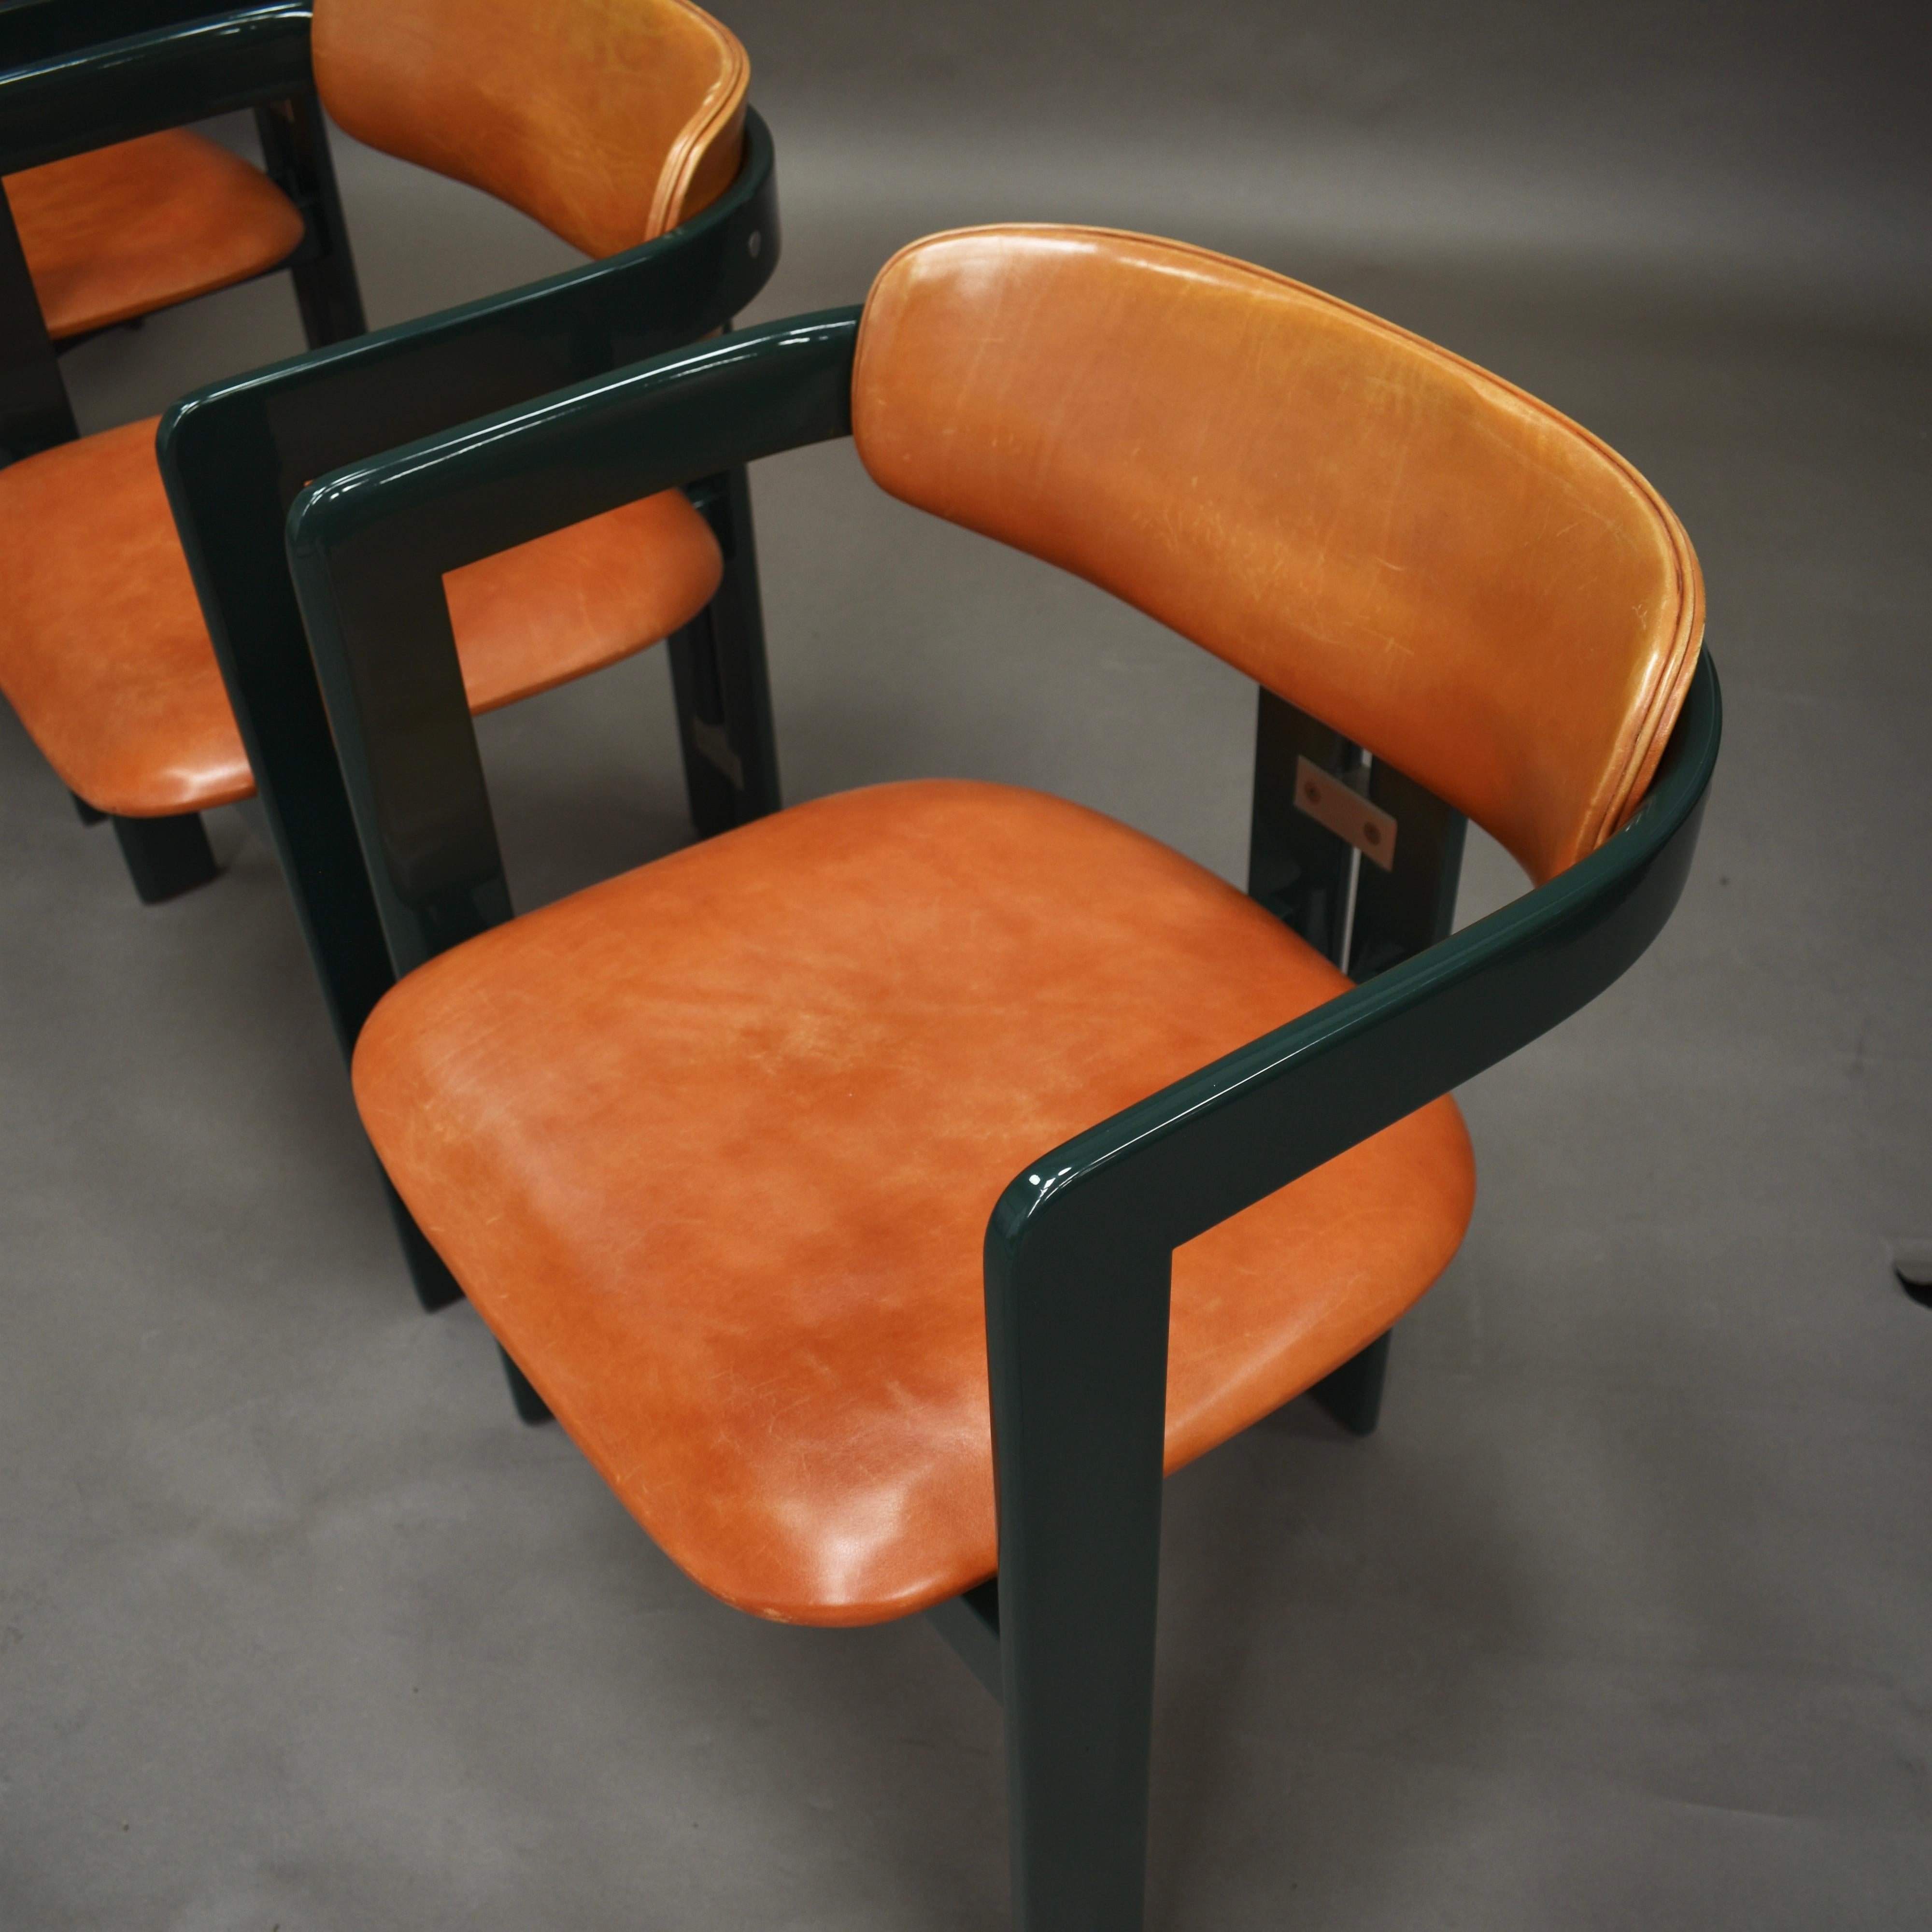 Pamplona Chairs by Augusti Savini in Green and Tan Leather, Italy, 1965 1